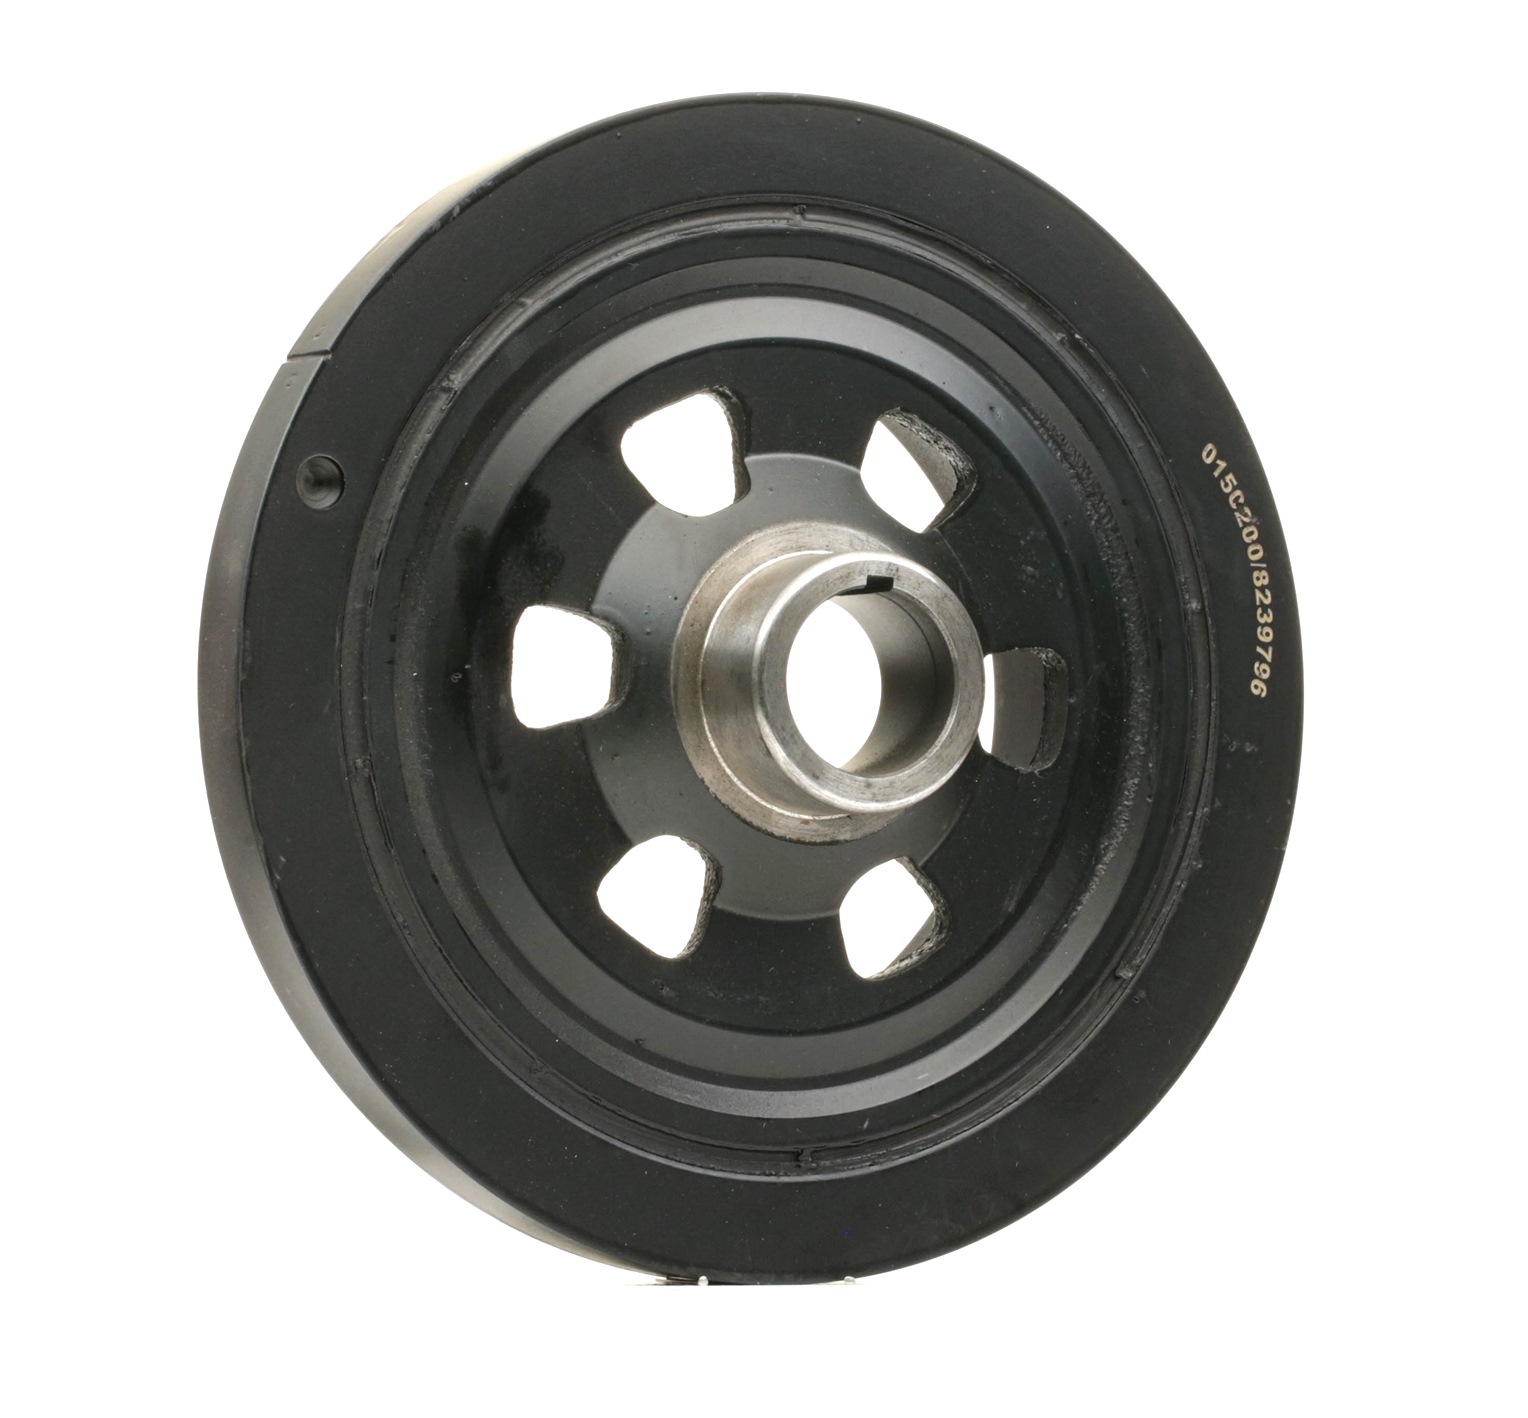 STARK SKBPC-0640124 Crankshaft pulley Ø: 216mm, Number of ribs: 5, Decoupled, with mounting manual